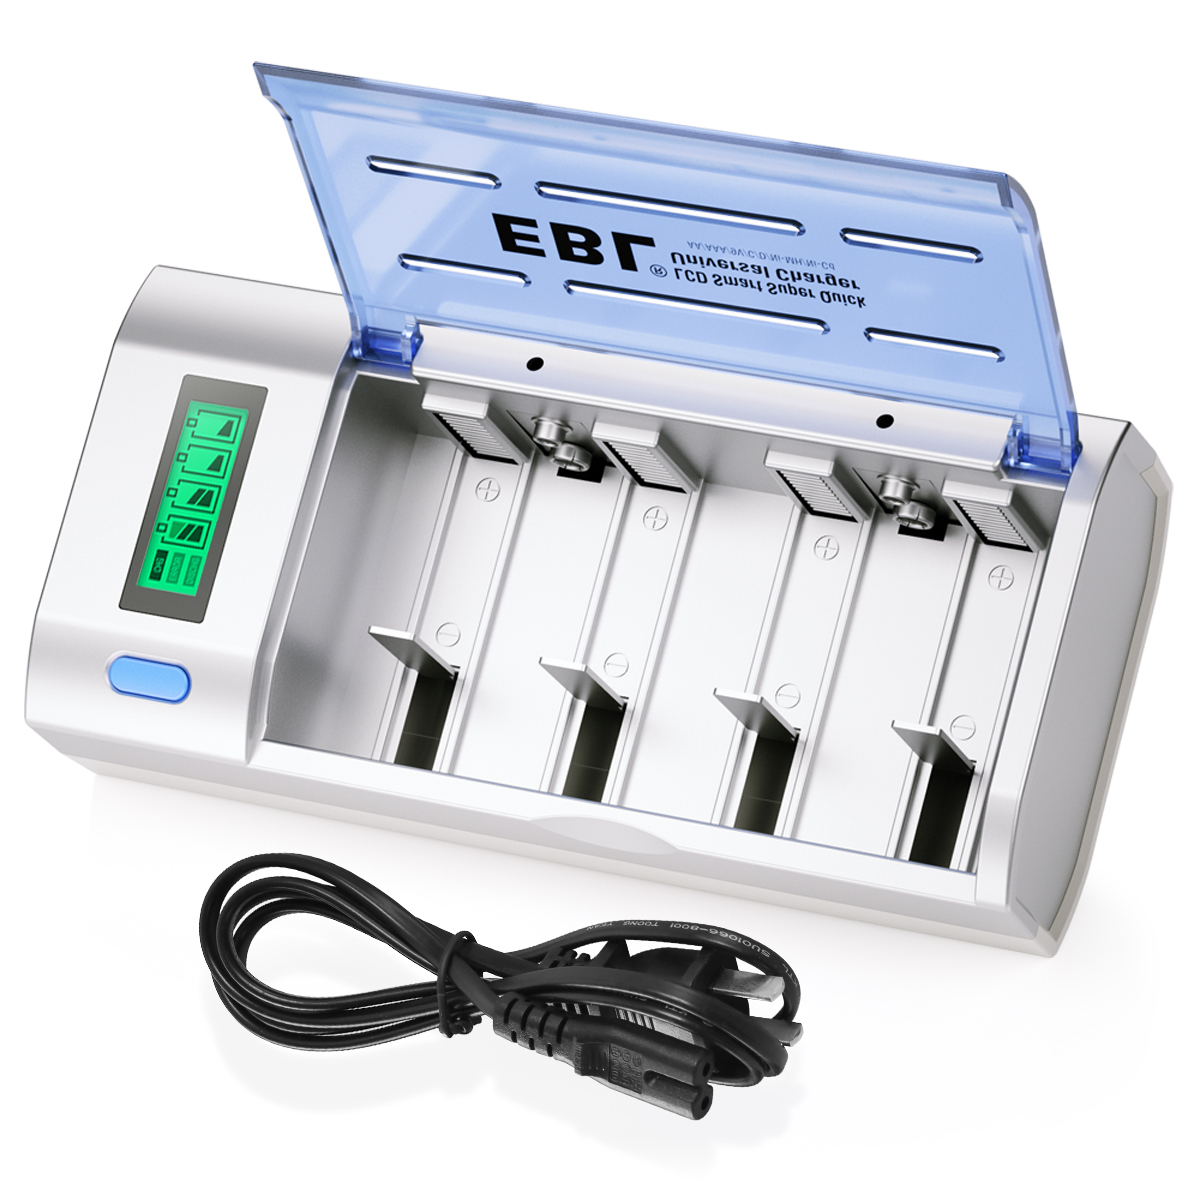 Ebl 906 Lcd Super Quick Battery Charger Discharger For C D 9v Rechargeable Batteries Eblmall Official Site